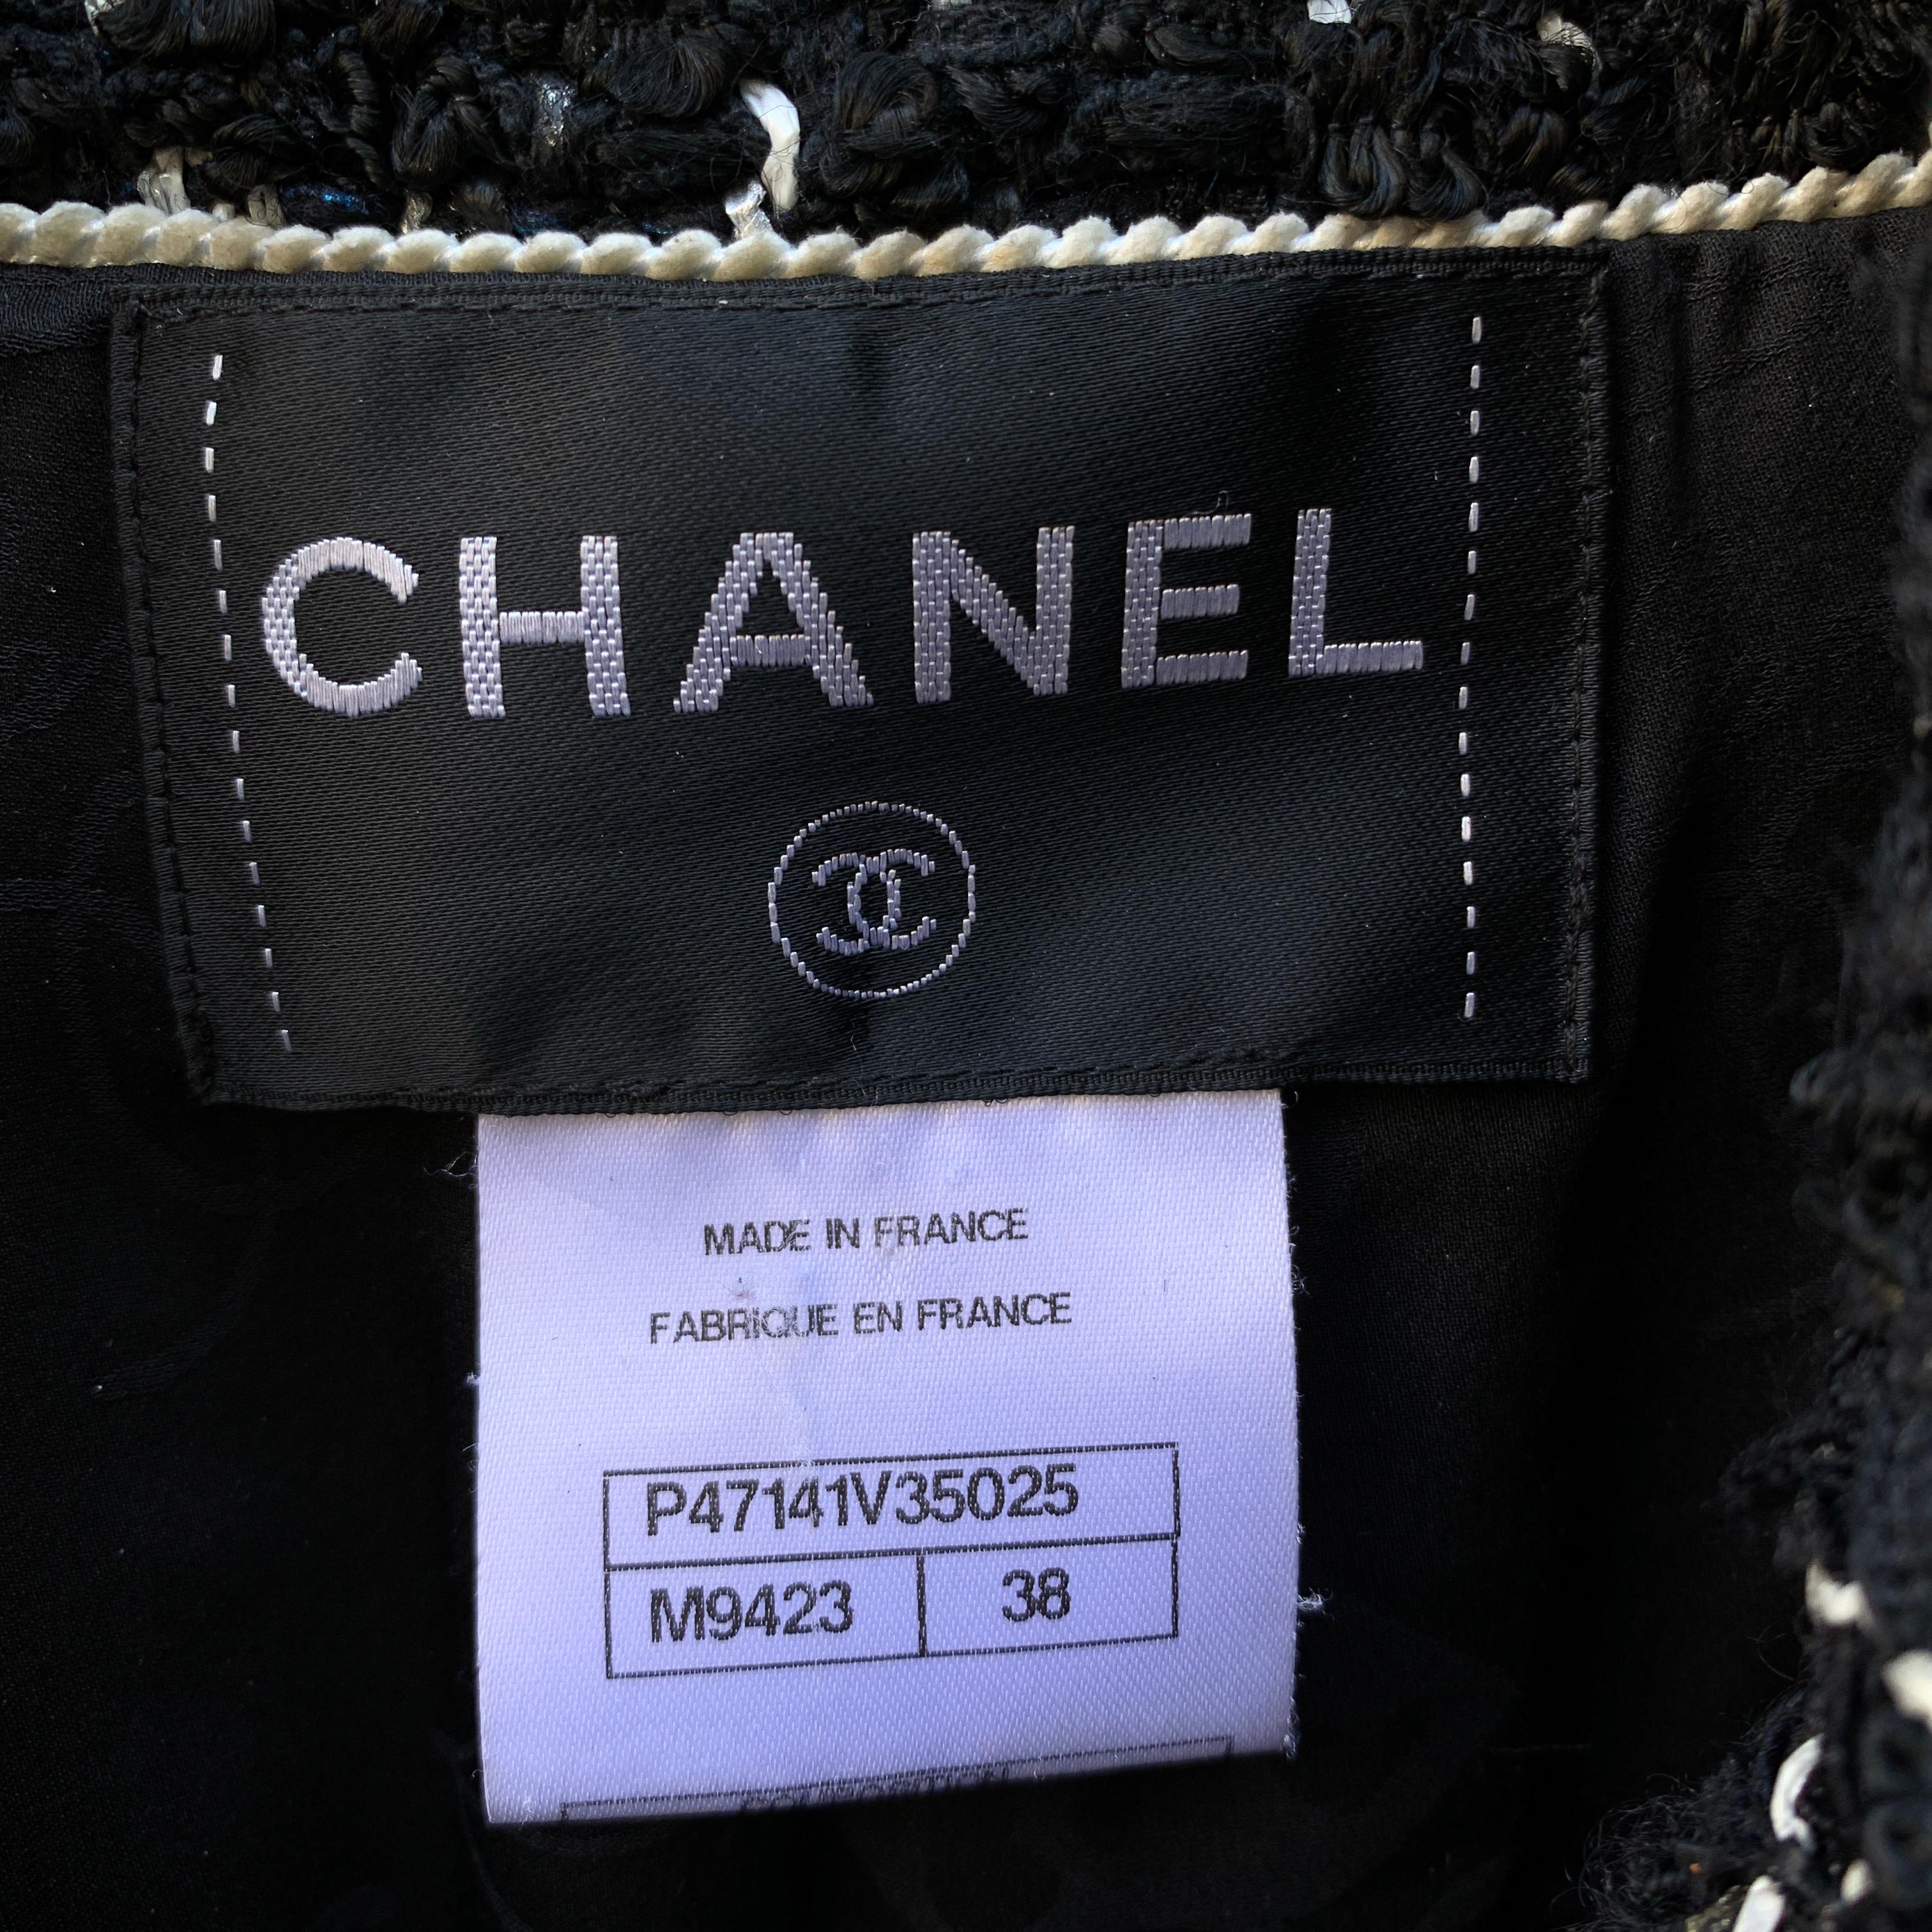 Chanel Black and White Tweed Planisphere Jacket Size 38 FR For Sale 2